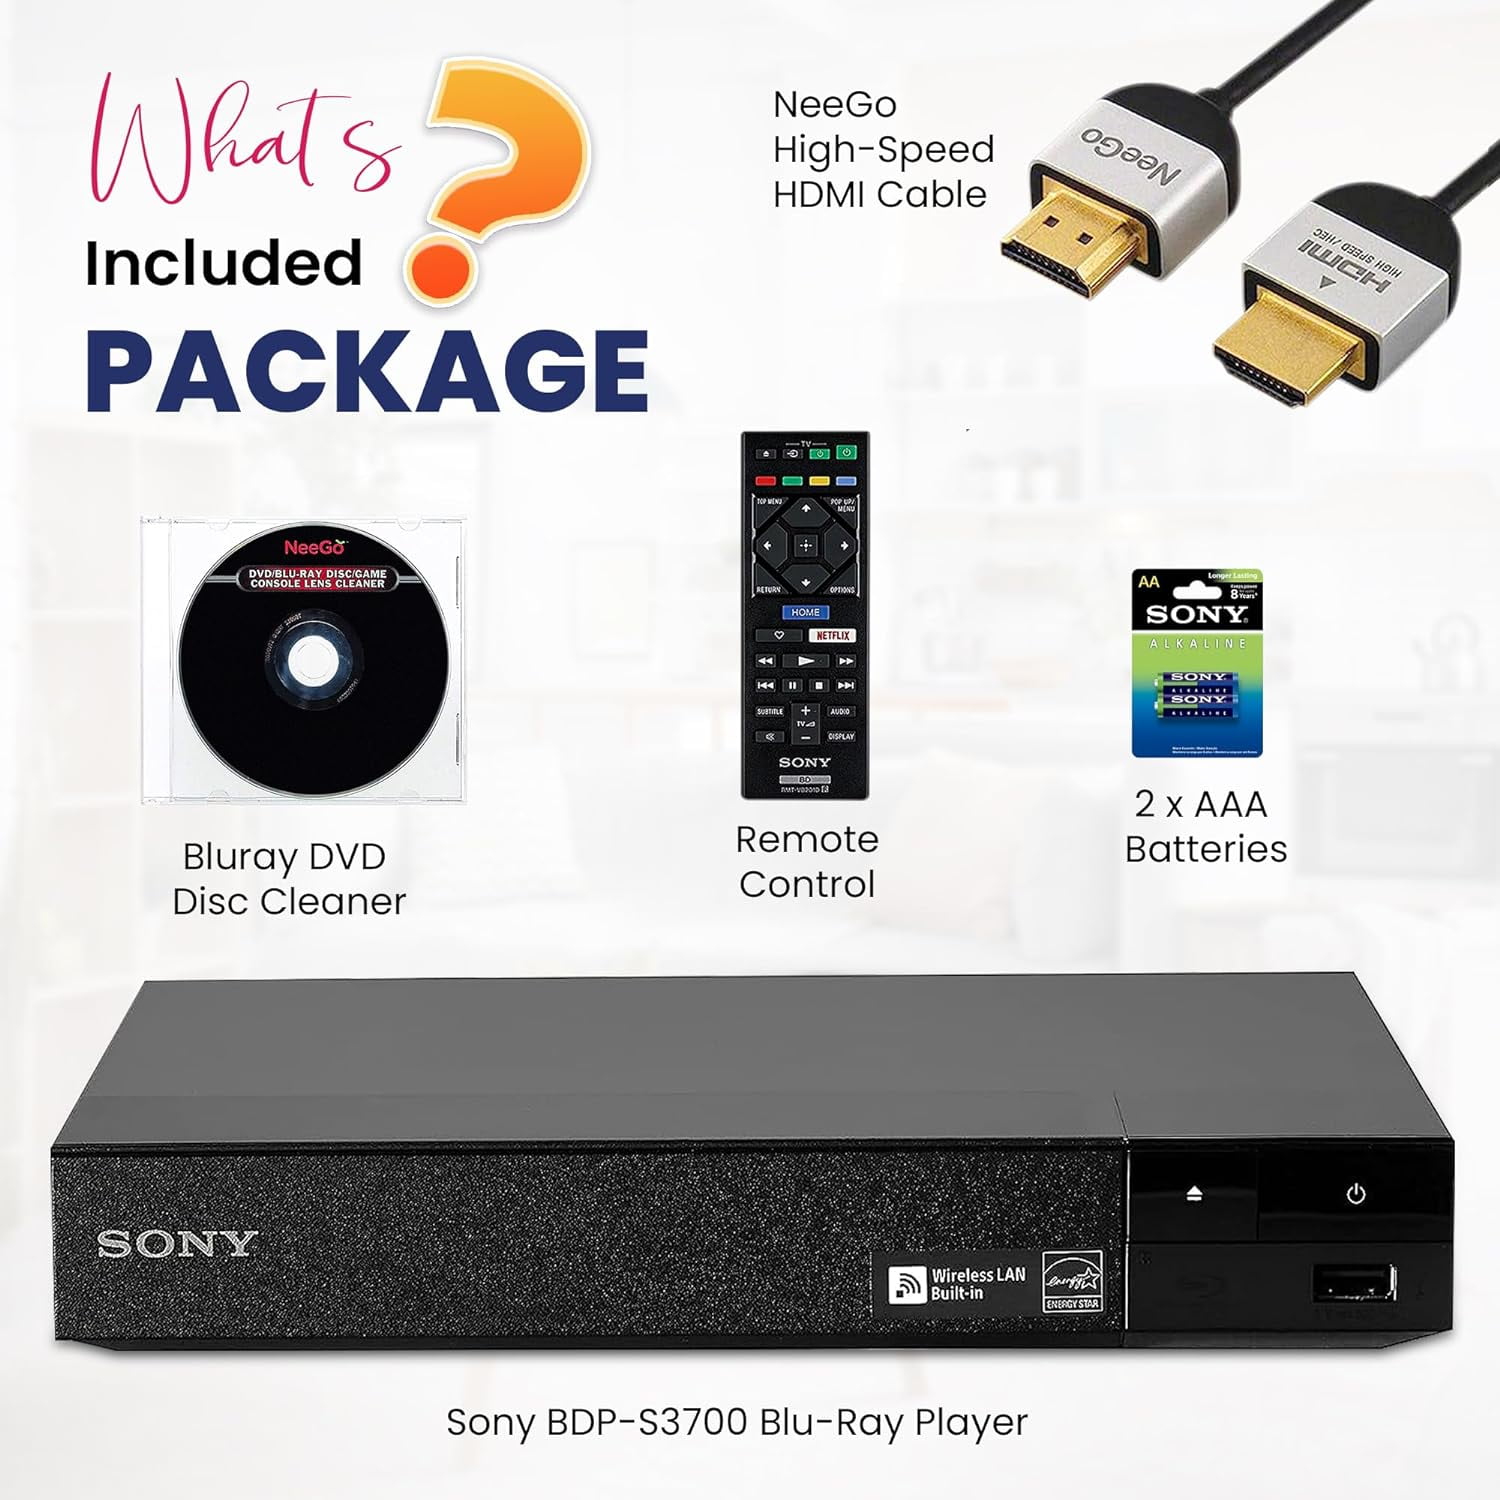 Sony Blu Ray DVD with Player Combo Smart for Ray Player Blu-Ray/DVD NeeGo DVD and Remote with Cable/ HDMI Cleaner Player TV with Built-in Wi-Fi BDP-S3700/BDP-BX370 Lens Blu Ethernet